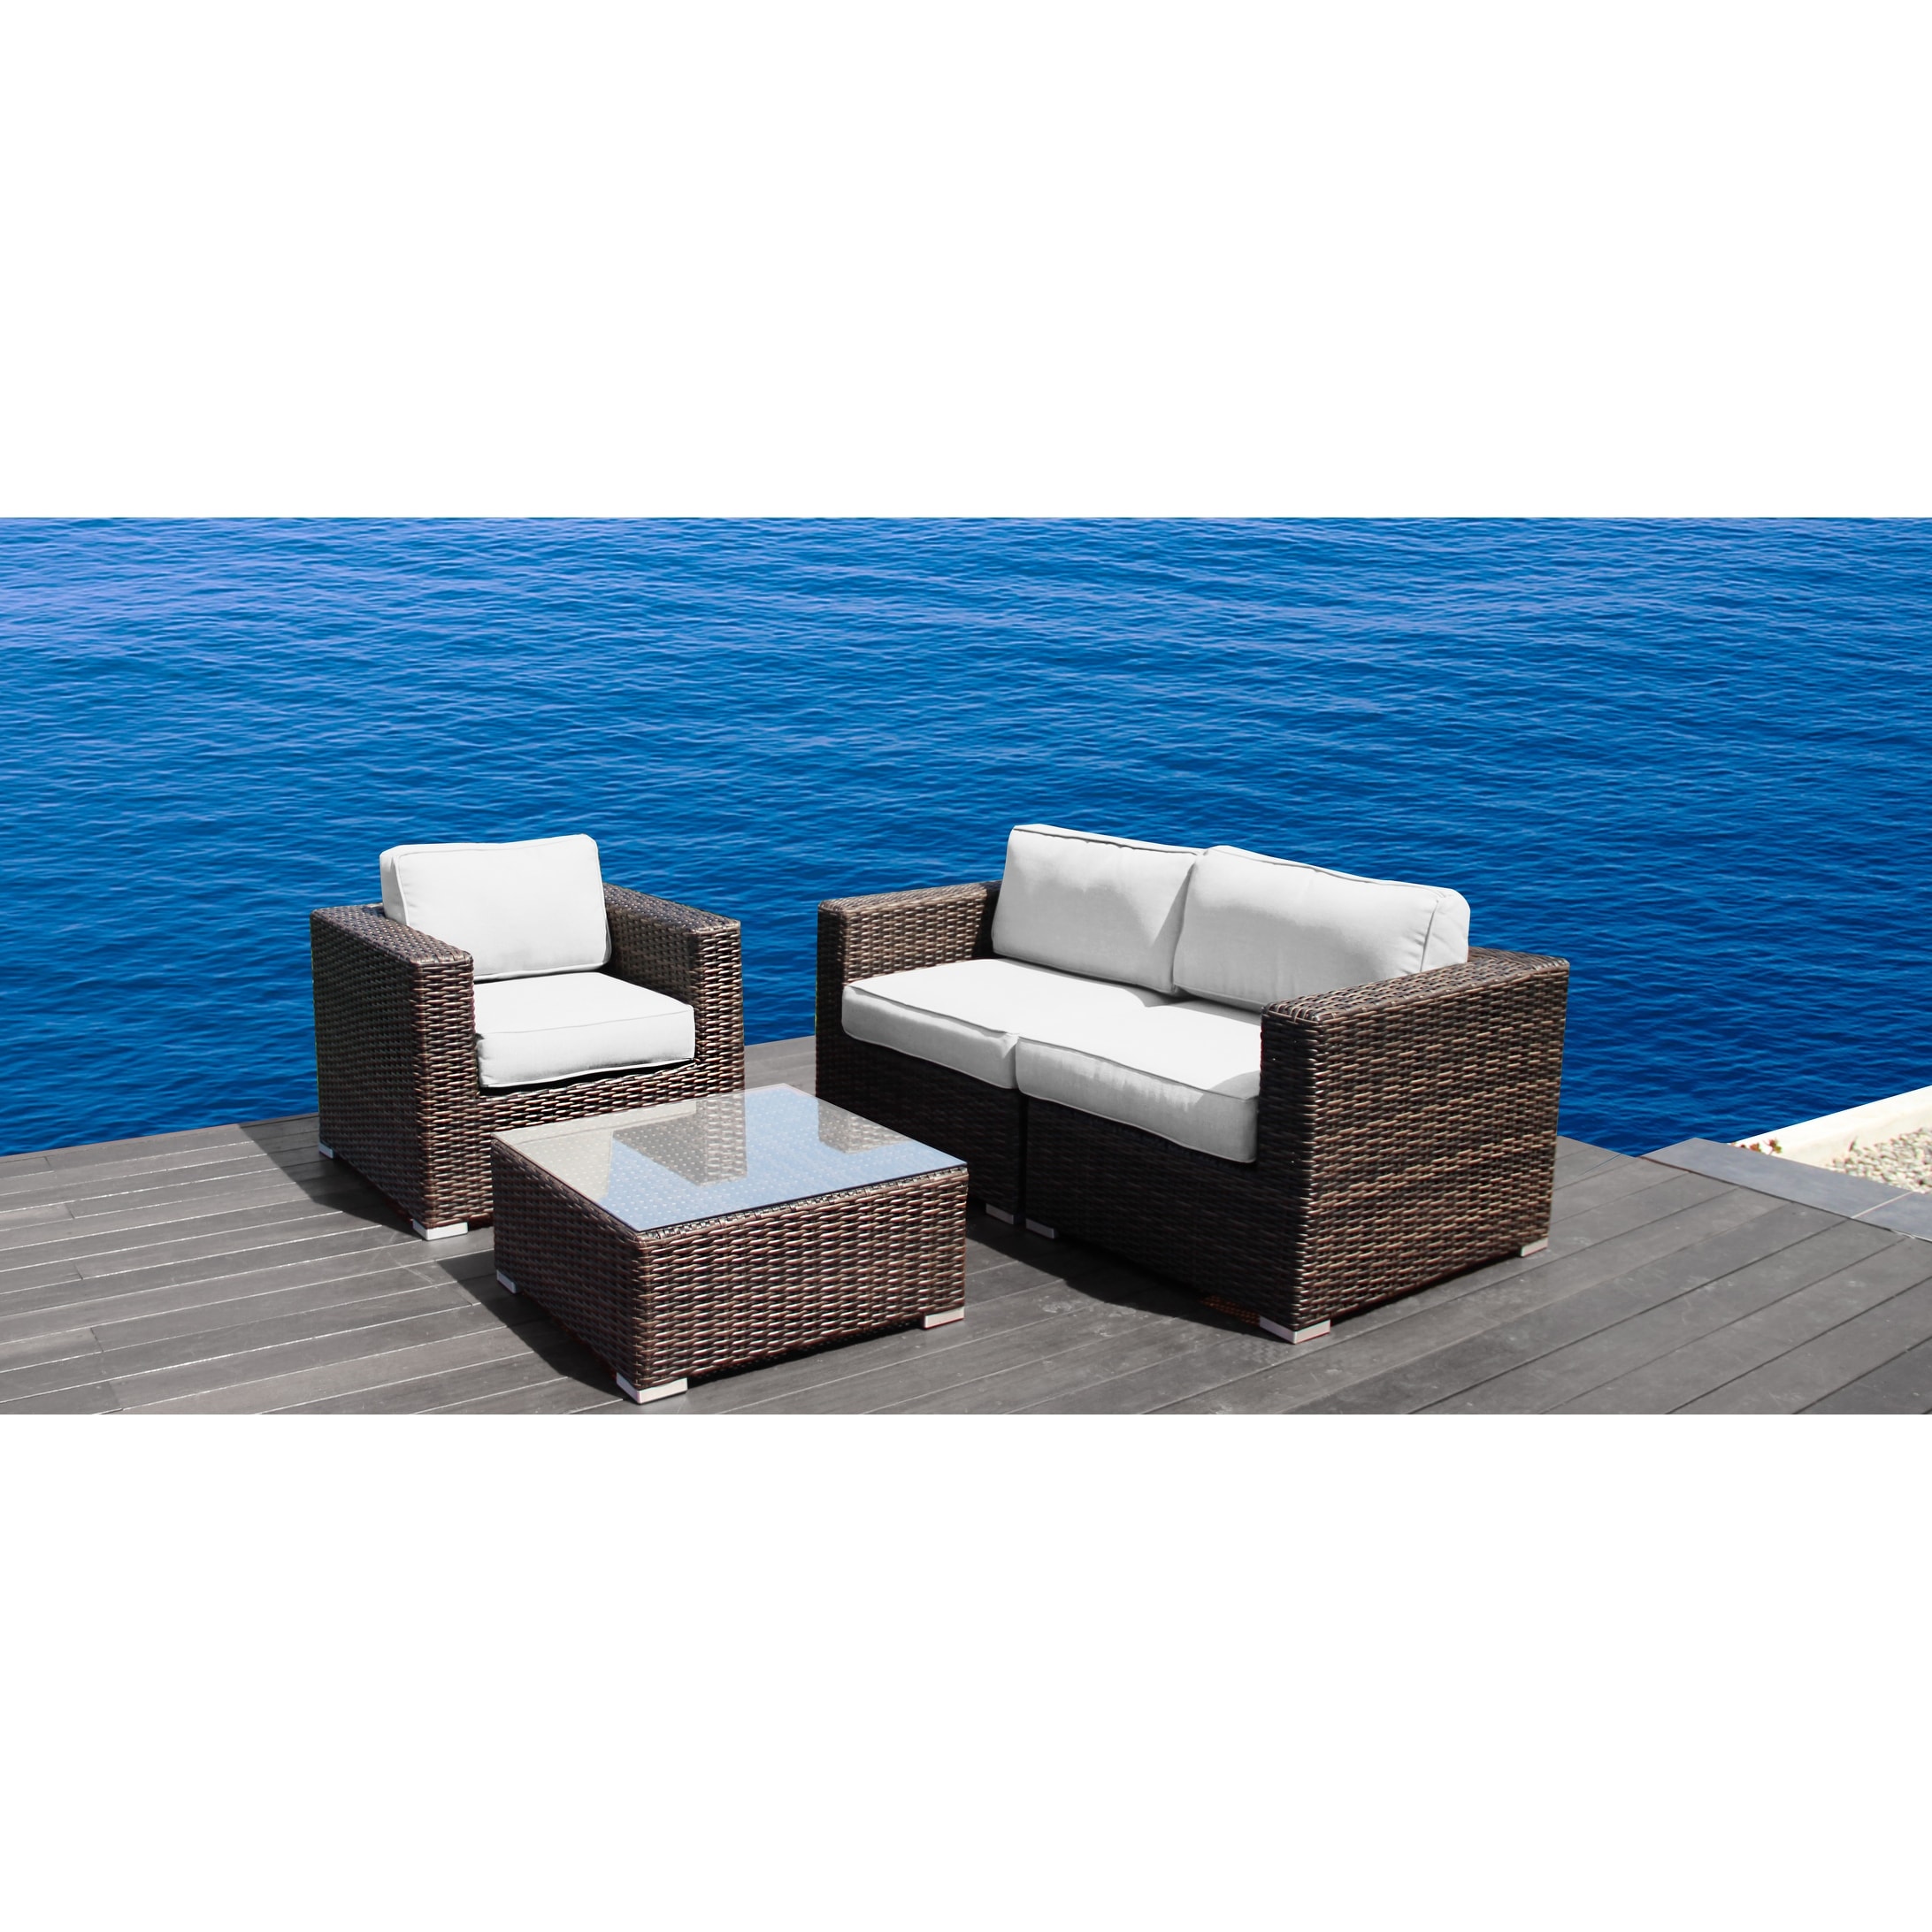 Lsi 4 Piece Club Set - All Weather Patio Sofa Set With Back Cushions